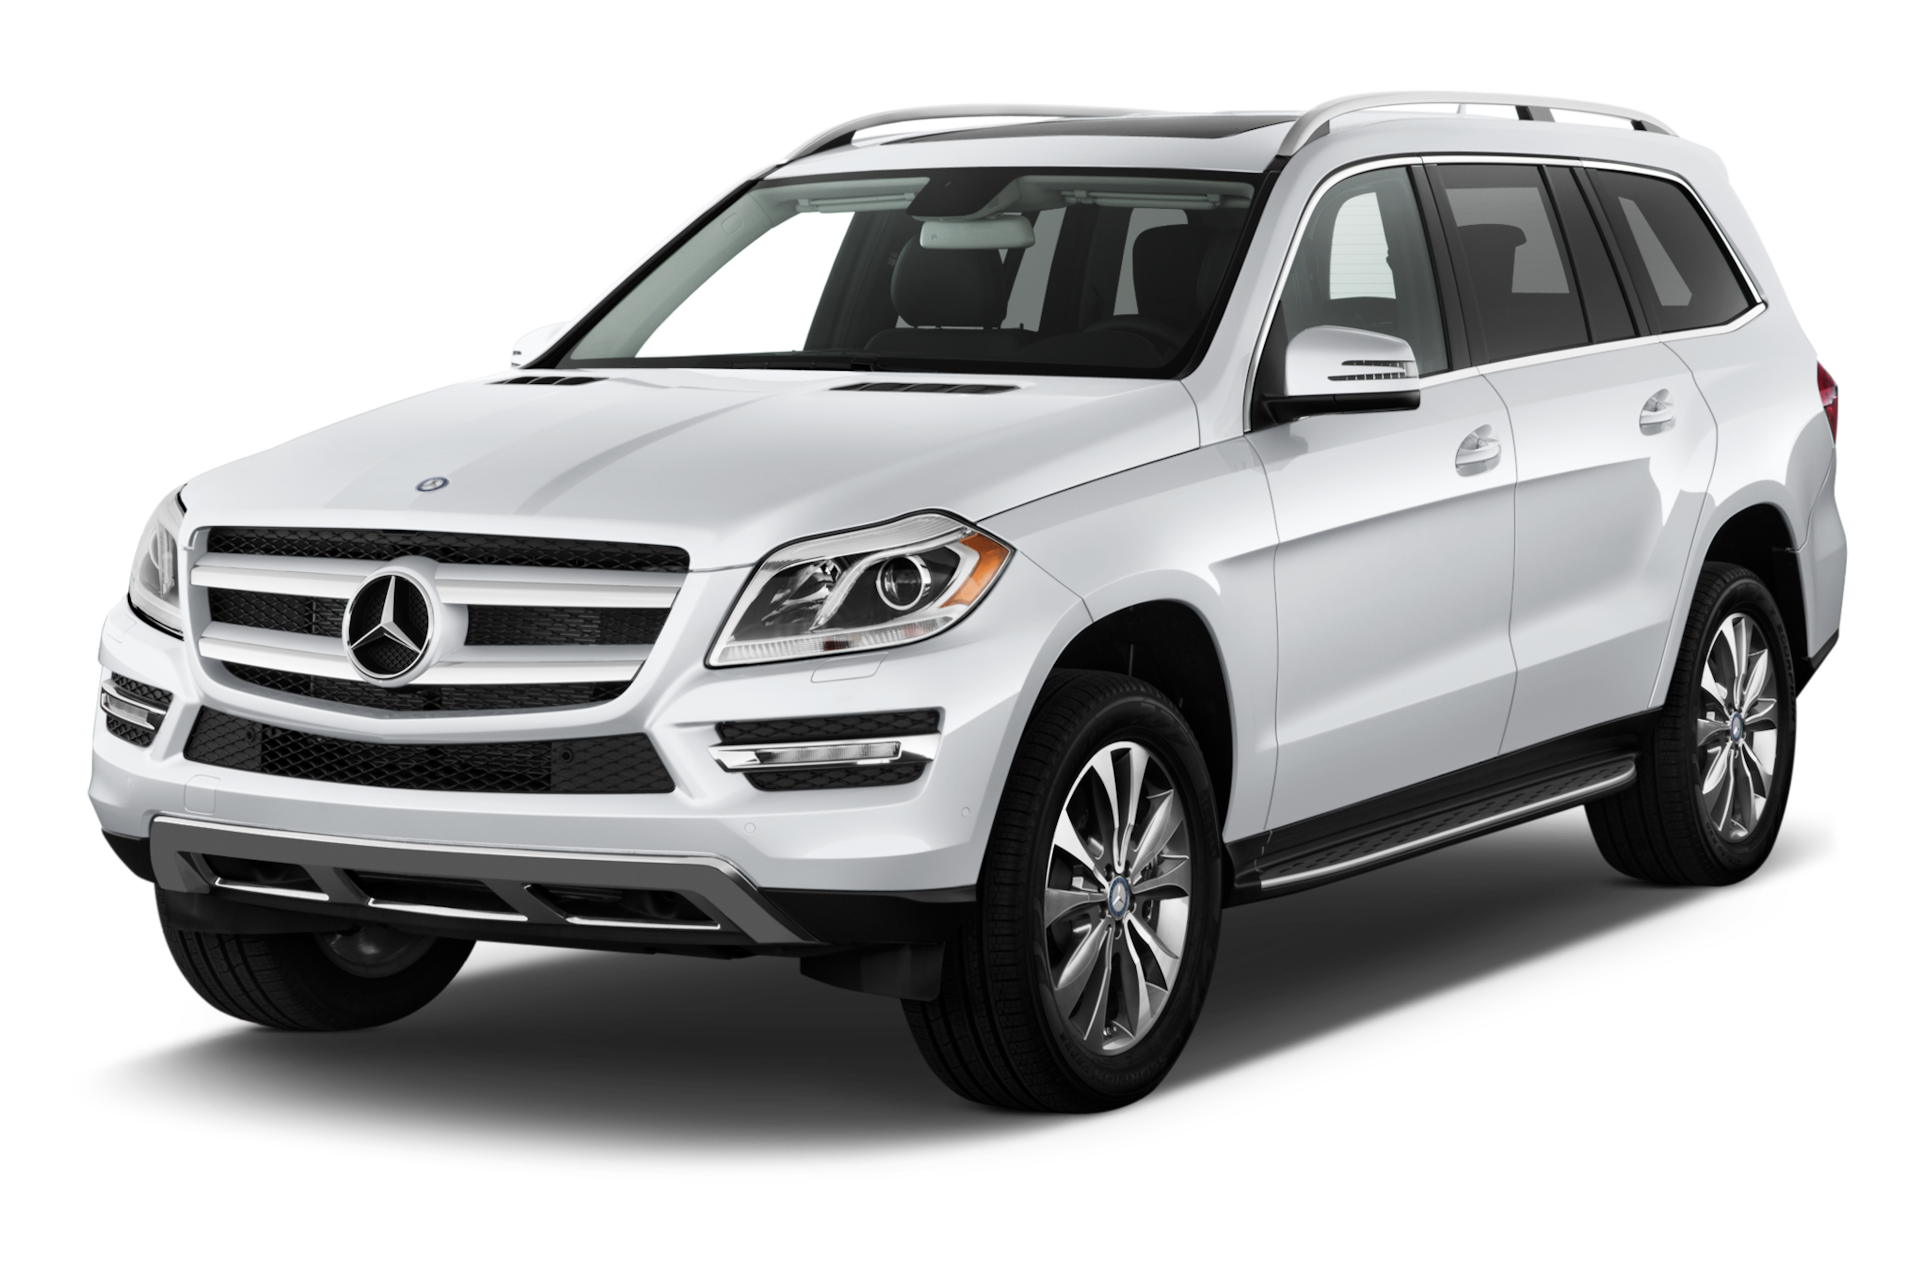 2016 Mercedes-Benz GL-Class Prices, Reviews, and Photos - MotorTrend